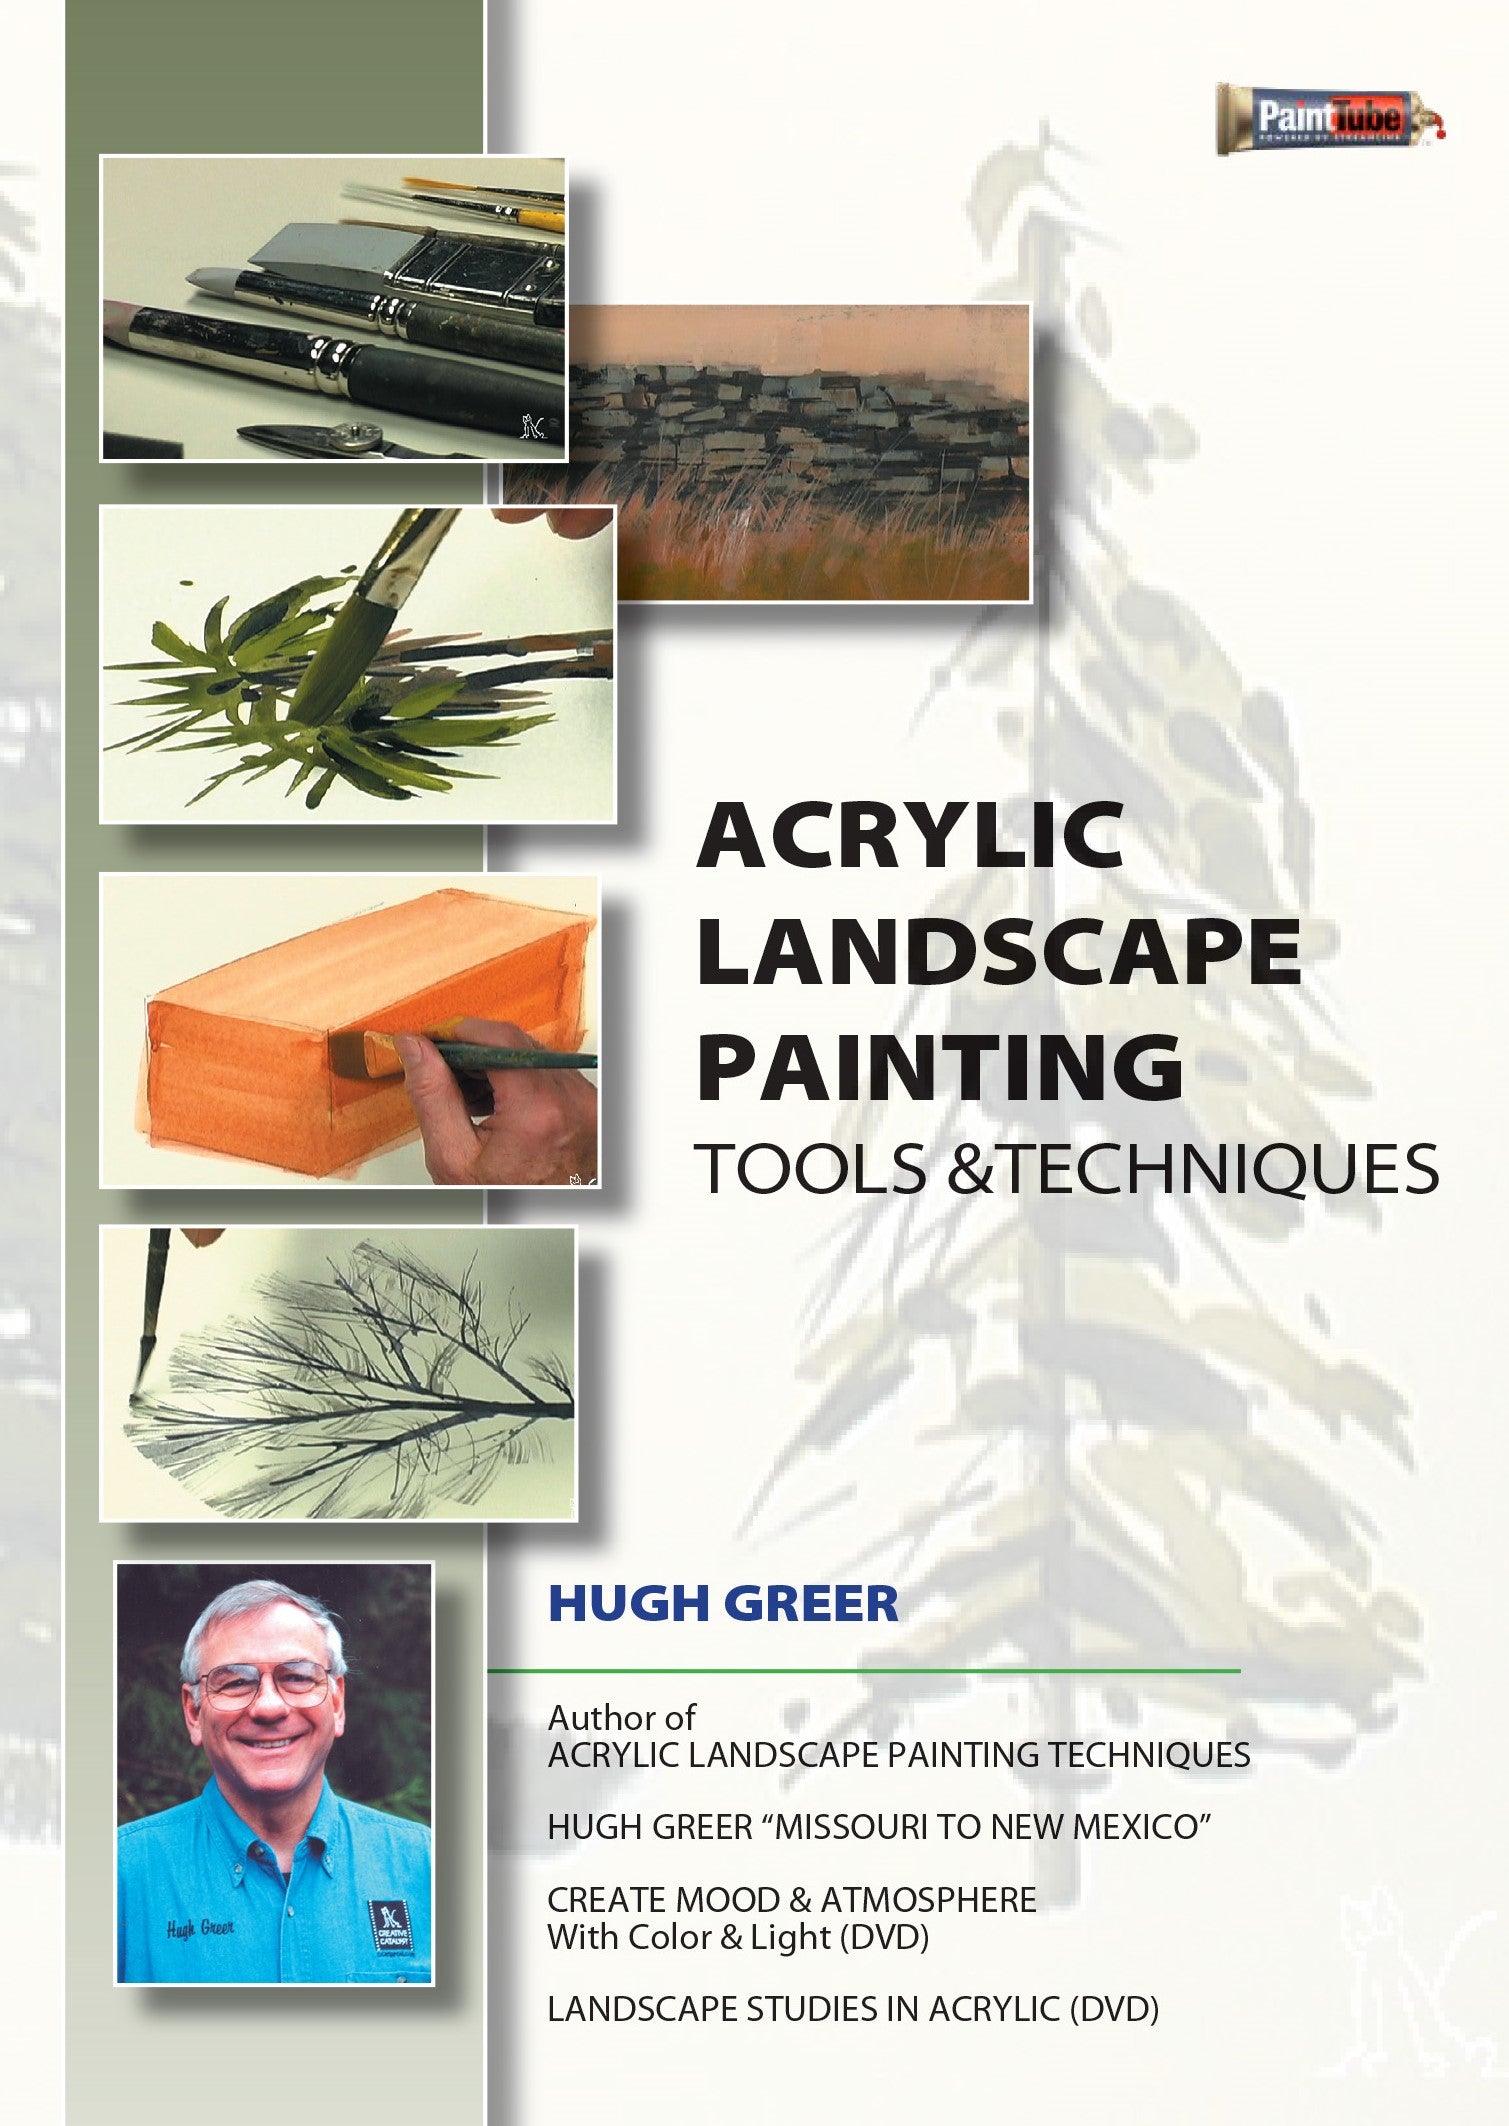 Hugh Greer: Acrylic Landscape Painting: Tools & Techniques